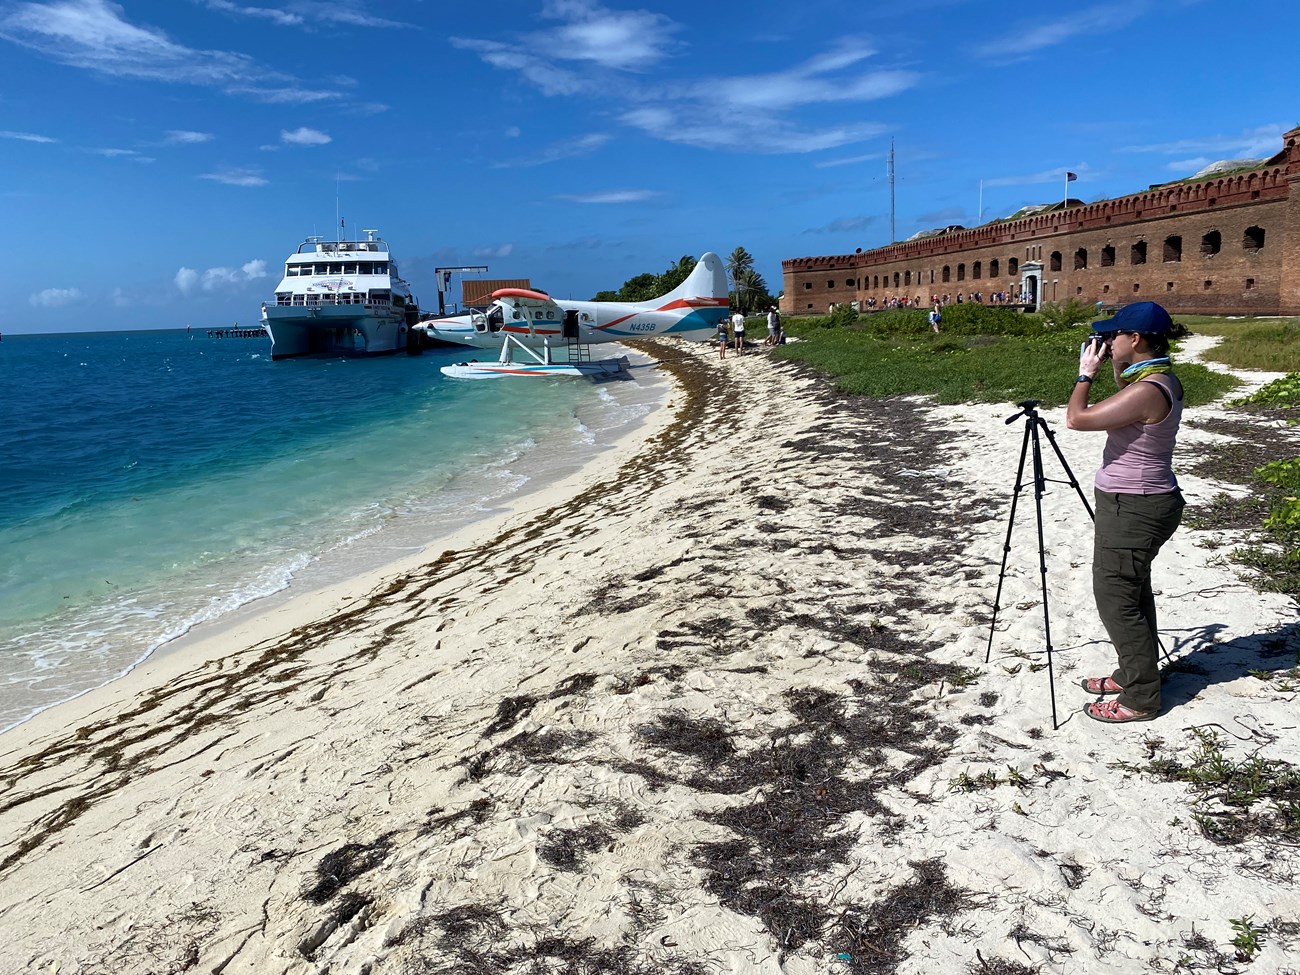 A woman photographing a seaplane and a boat docked by a beach and a large brick structure